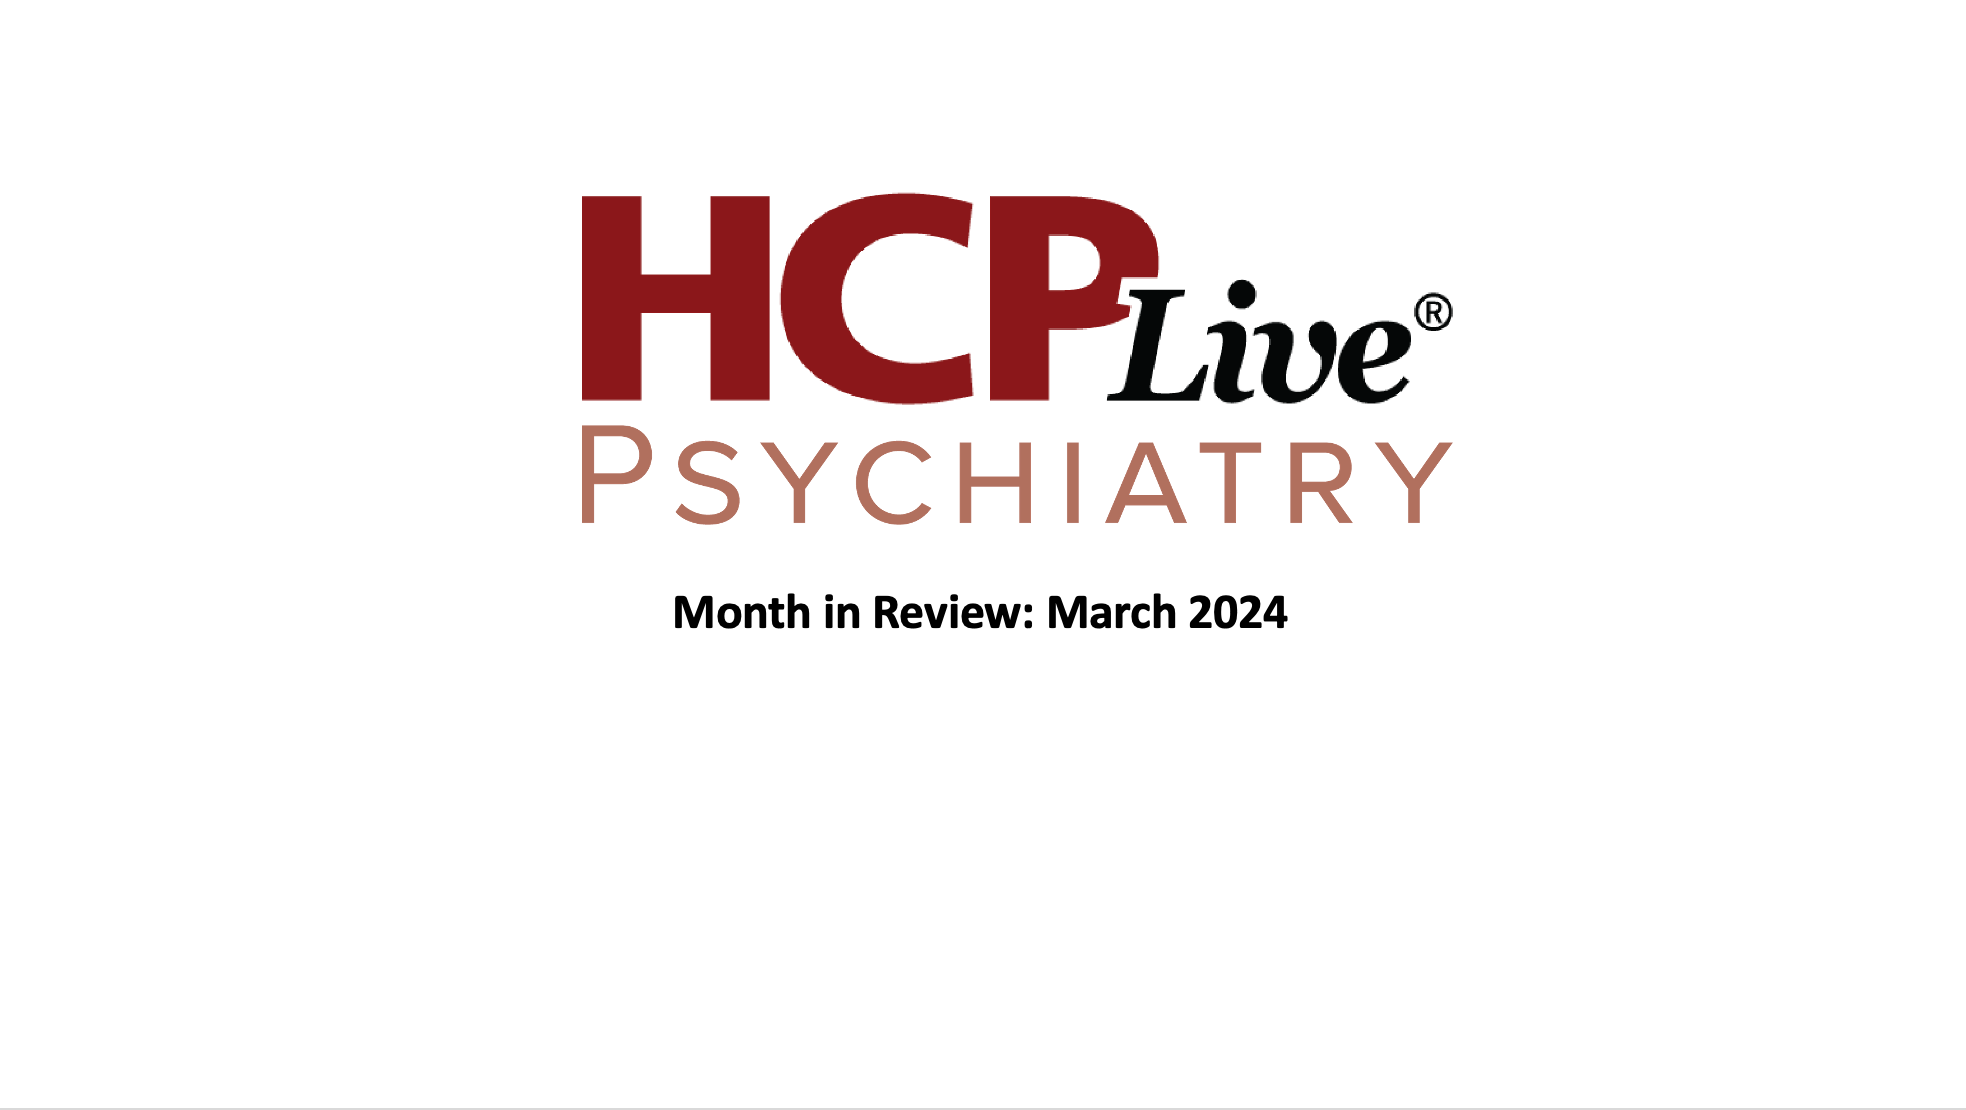 Psychiatry Month in Review: March 2024